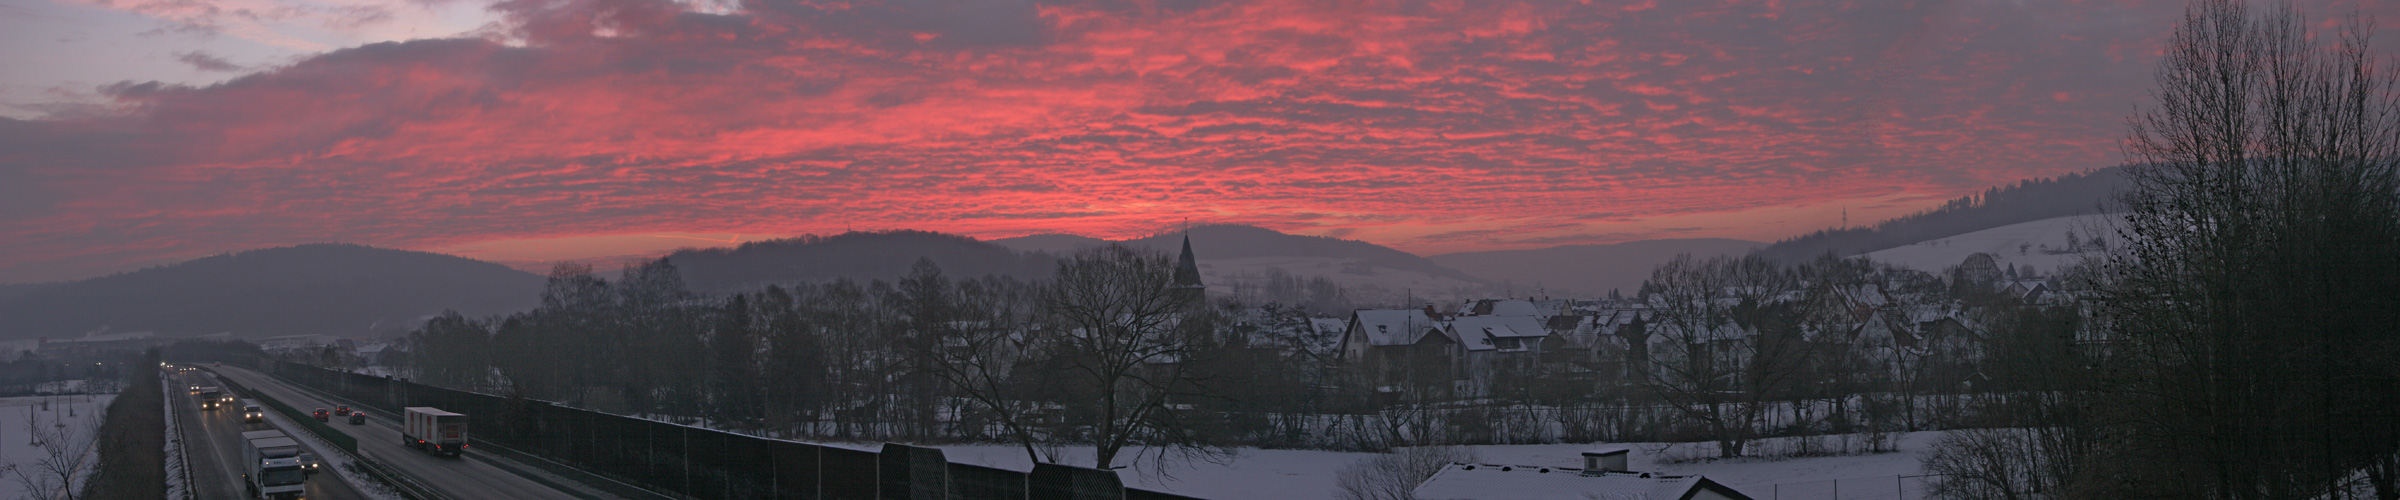 Morgenrot im Kinzigtal